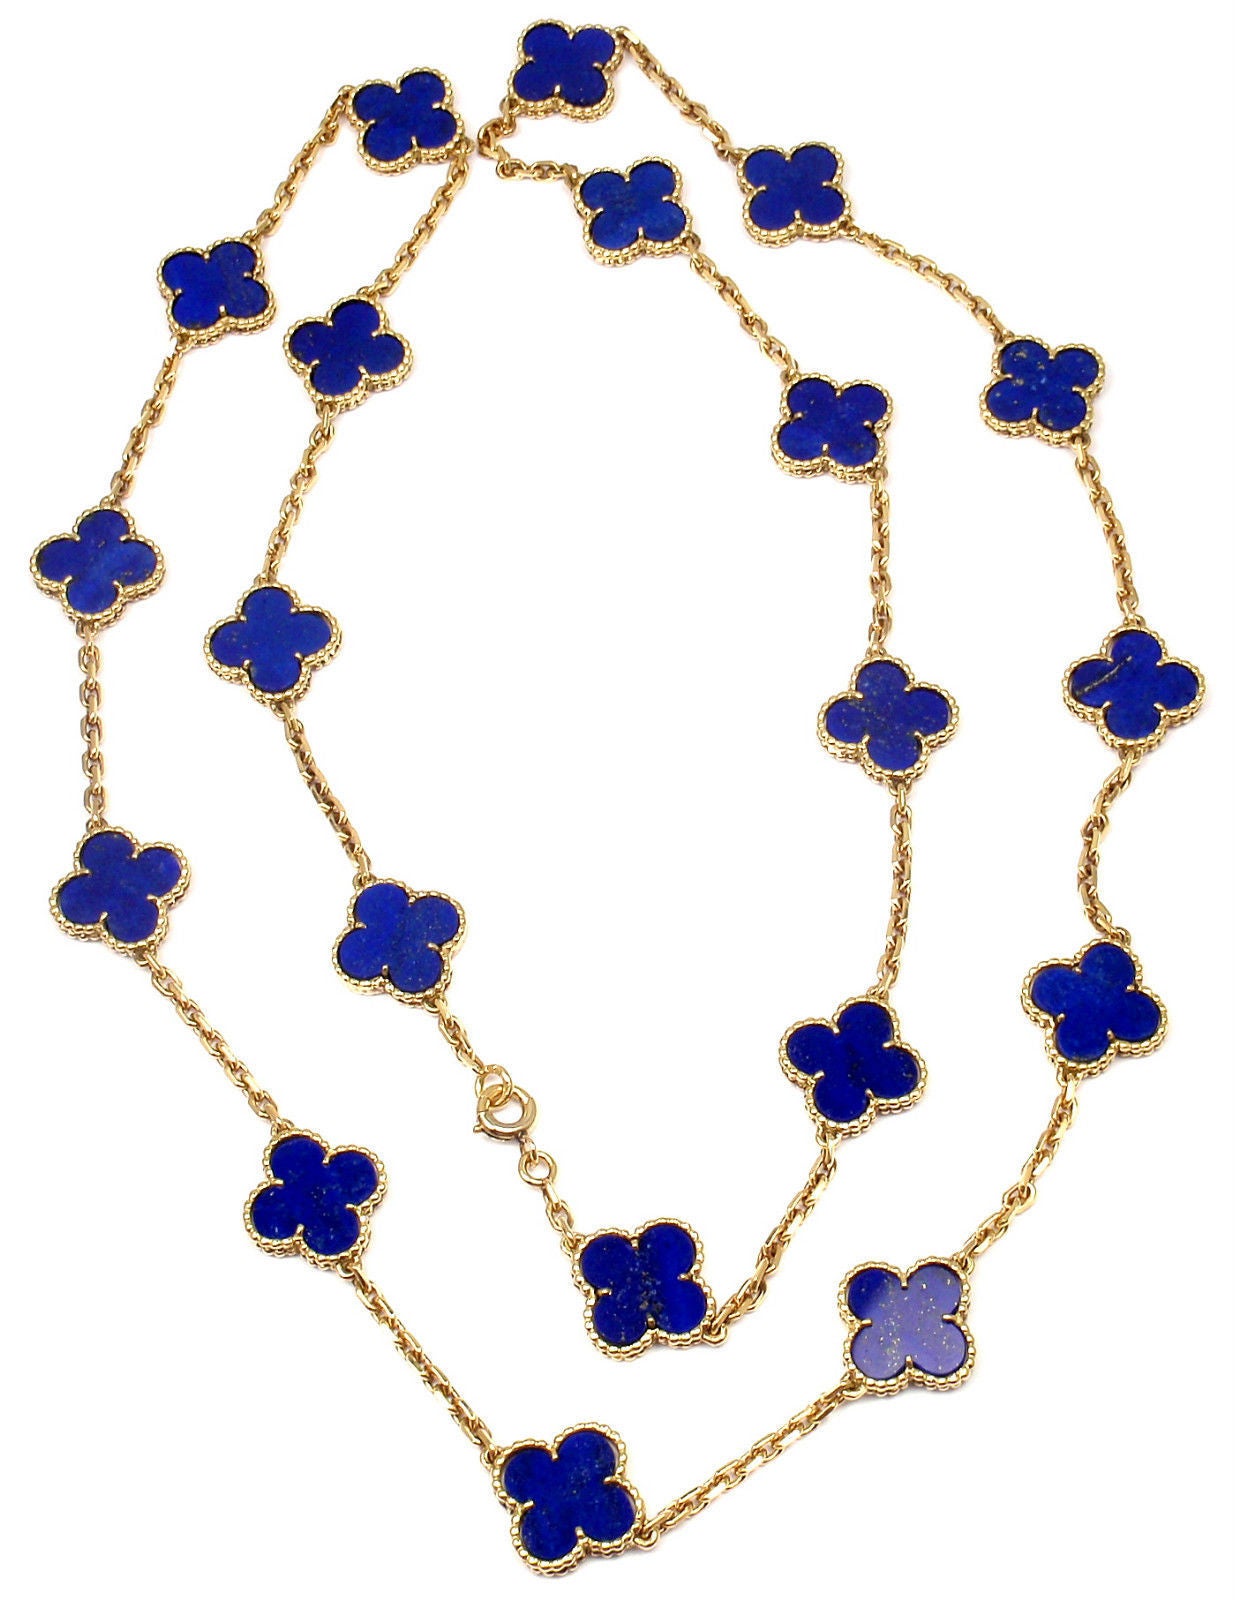 18k Yellow Gold Alhambra 20 Motifs Lapis Lazuli Necklace by 
Van Cleef & Arpels, with 20 motifs of Lapis Lazuli Alhambra stones, 15mm each.

This is a rare, very collectible, antique Van Cleef & Arpels Lapis Lazuli Alhambra 
necklace from the